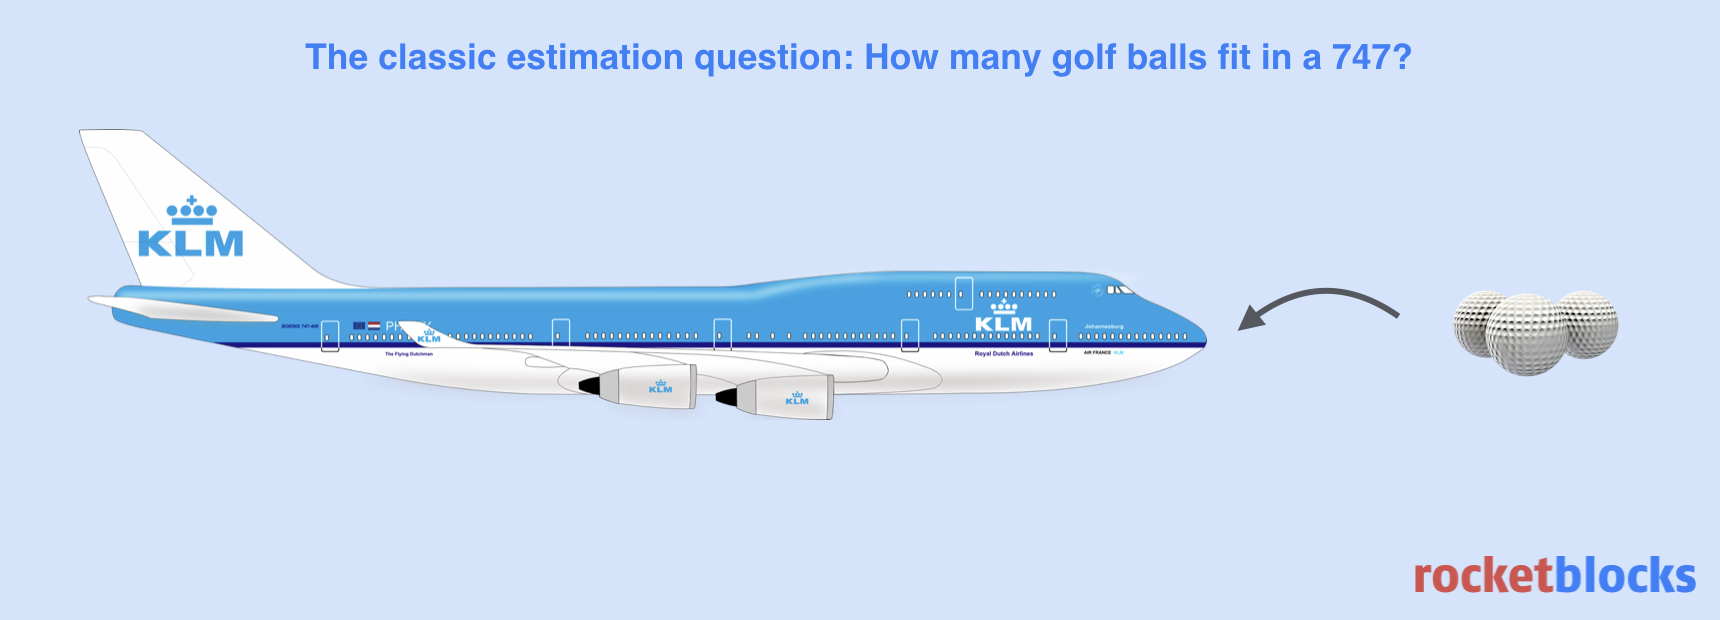 The classic estimation question: how many golf balls could fit in a 747?